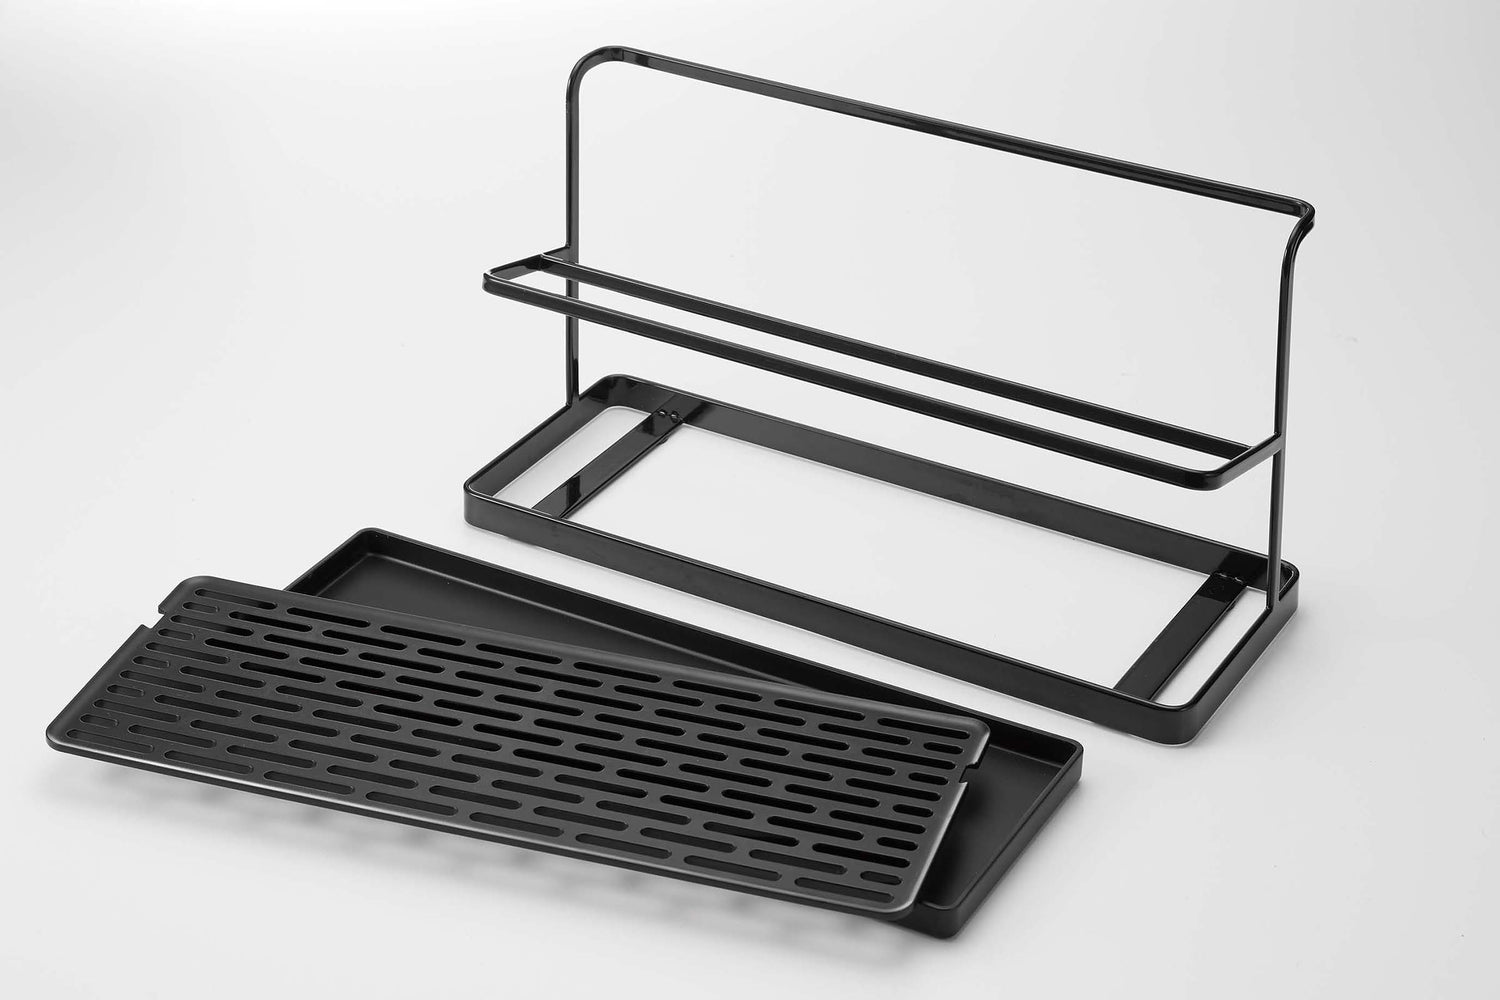 View 14 - Black Countertop Bottle Drying Rack disassembled on white background by Yamazaki Home.